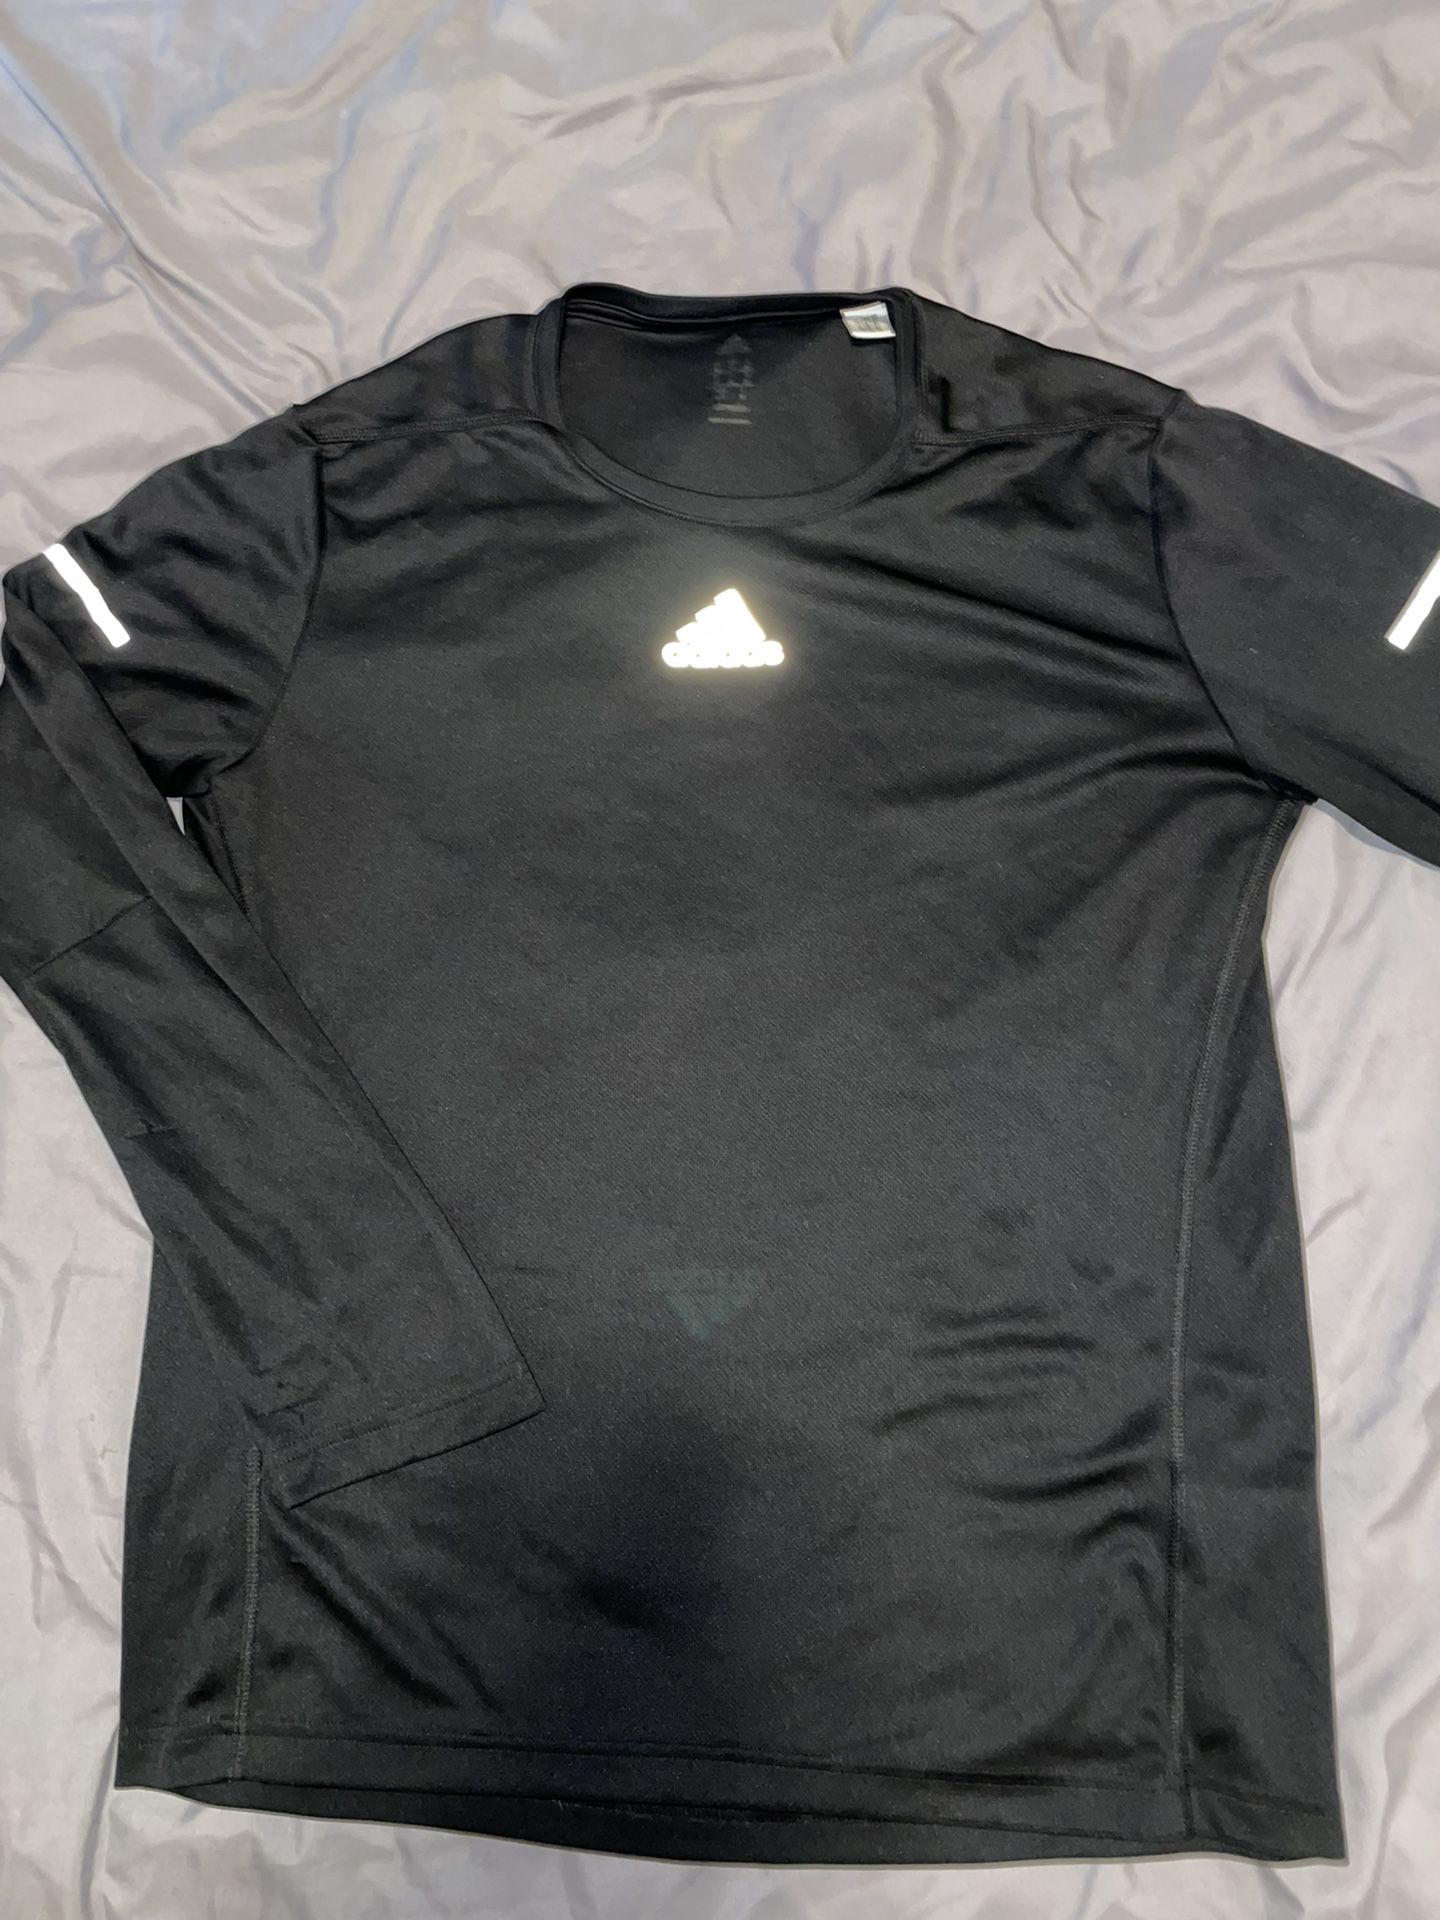 running shirt CLIMALITE for Sale Brooklyn, NY OfferUp